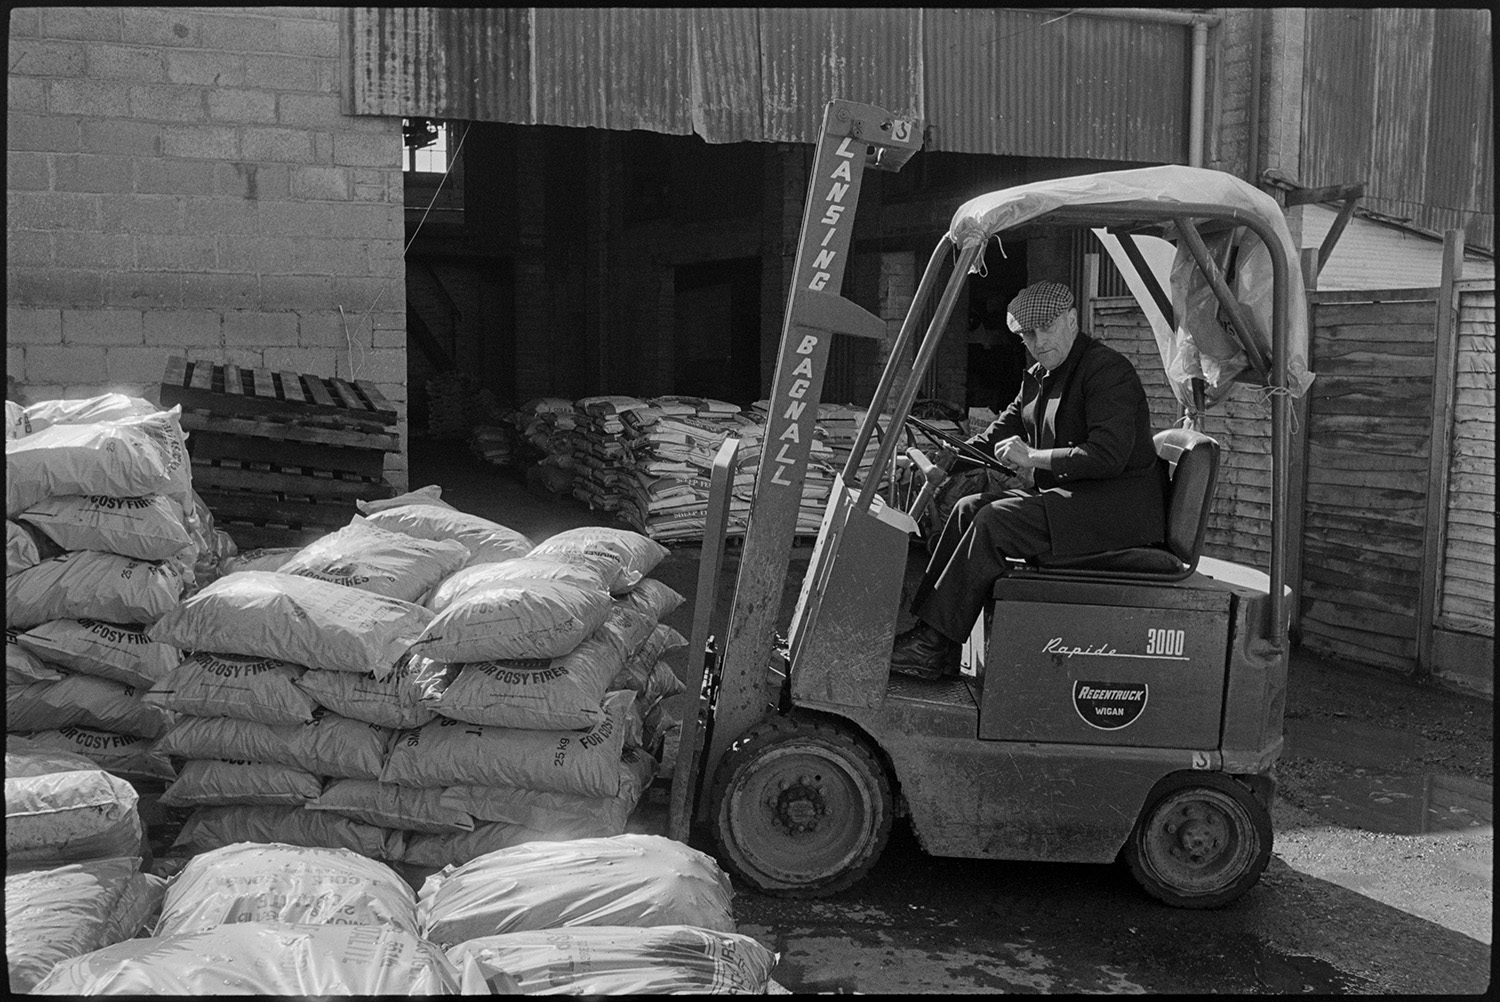 Men unloading fertiliser with fork lift truck.
[Les Shapland is using a fork lift truck to move bags of fuel in a yard at East Street, Chulmleigh. There are more plastic bags stacked on pallets in the corrugated iron shed in the background.]